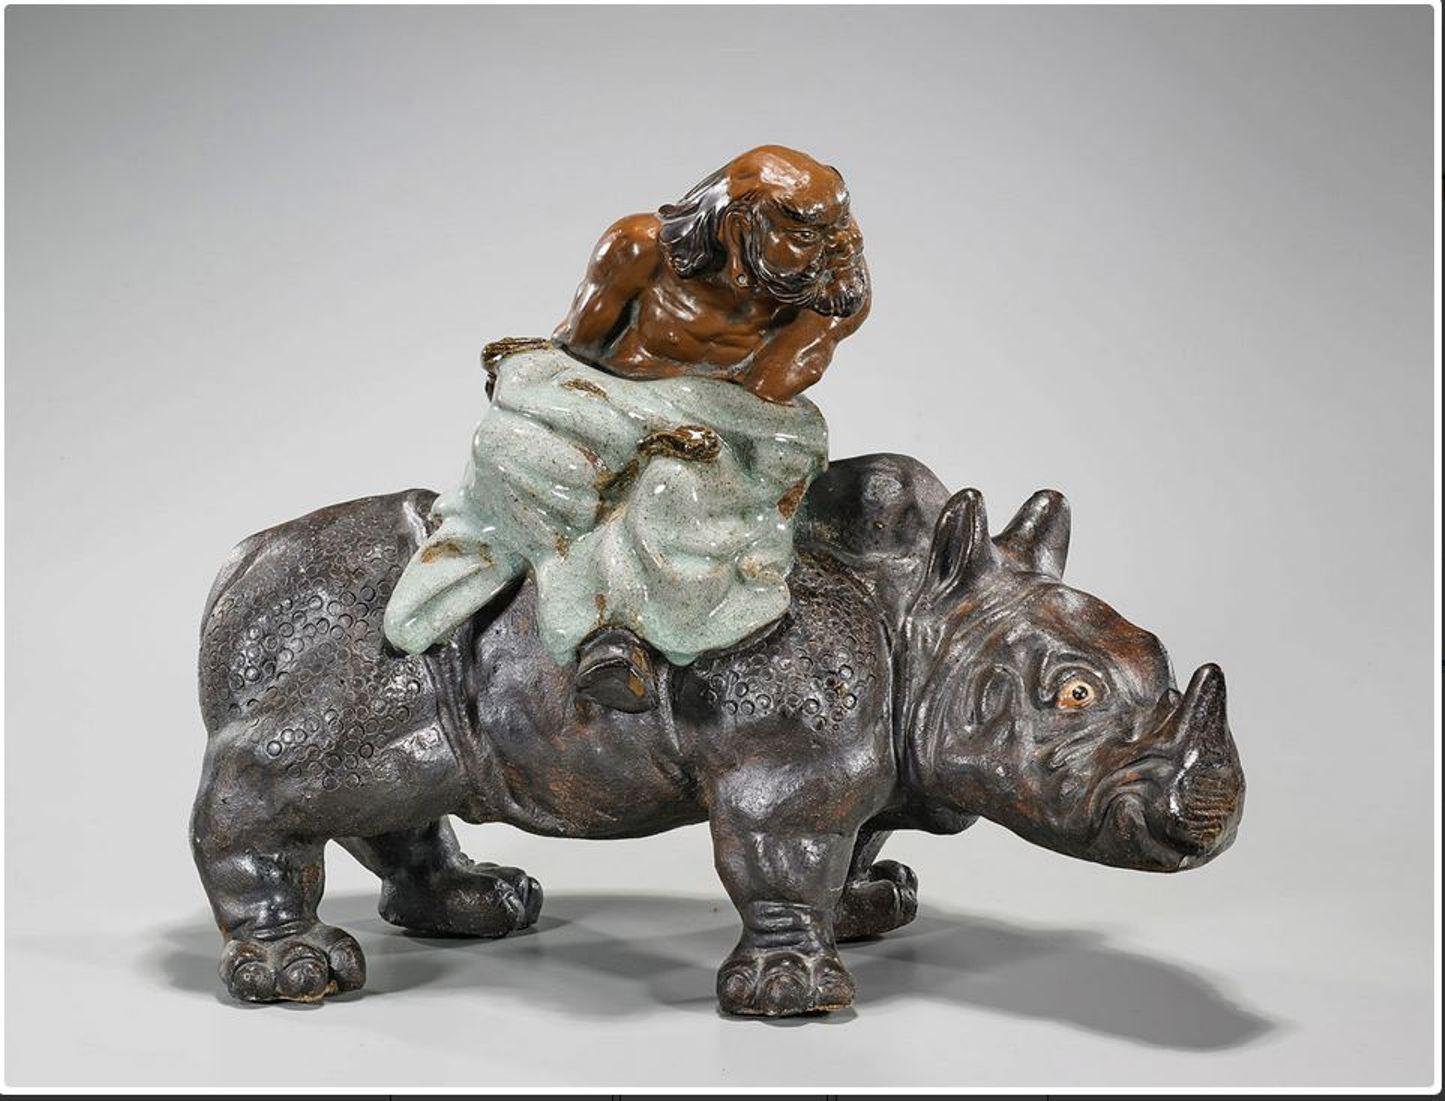 A very decorative Chinese Shekwan glazed pottery figural sculpture of a seated Lohan riding a rhinoceros.